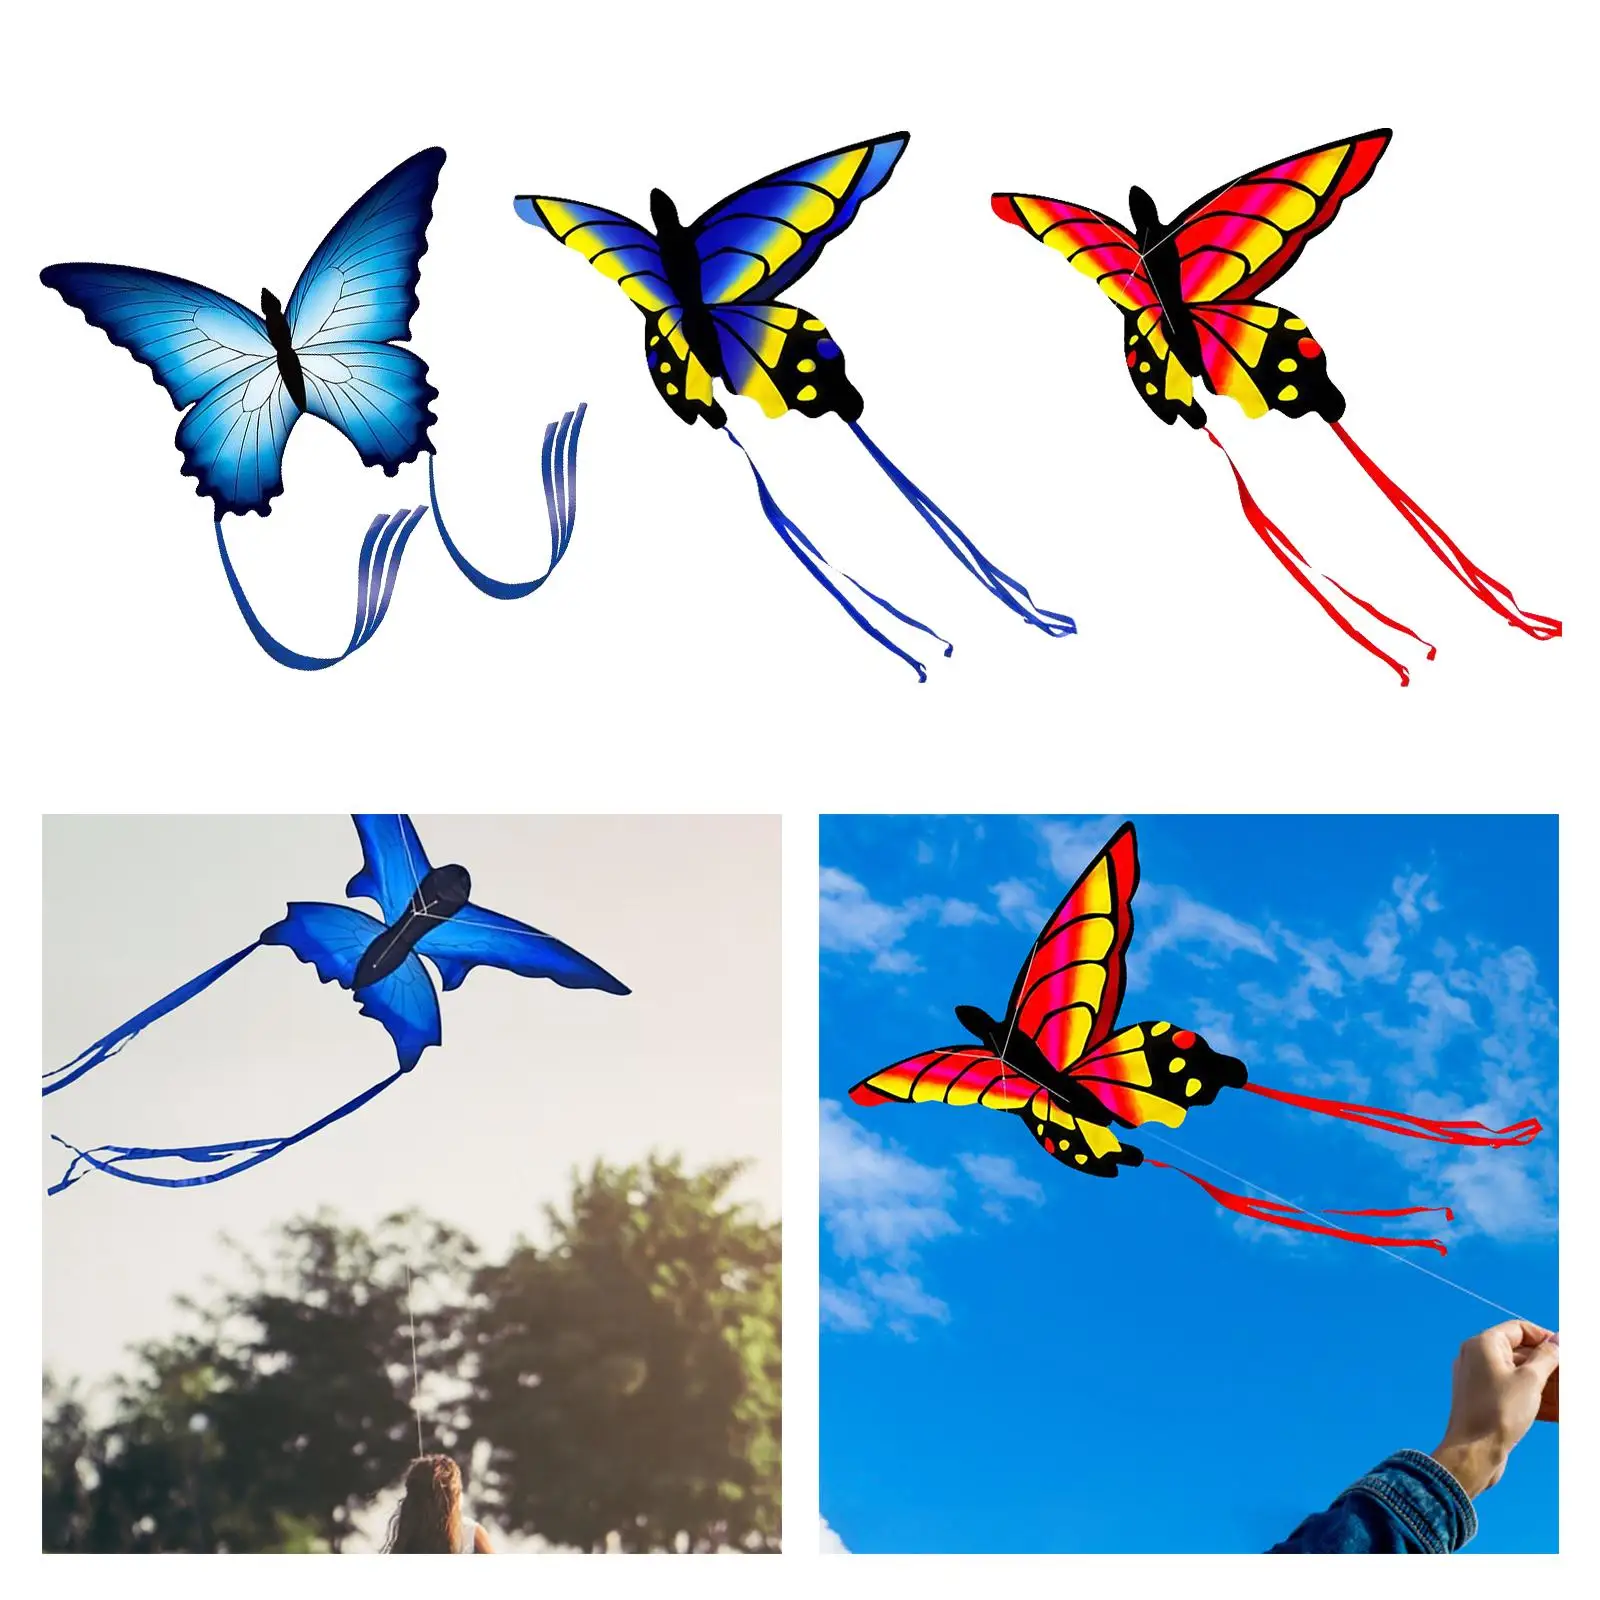 Funny Kites Flying Game, Kites, Toys, Playing Games, Outdoor Toys, Easy , for Kids Adults Gift